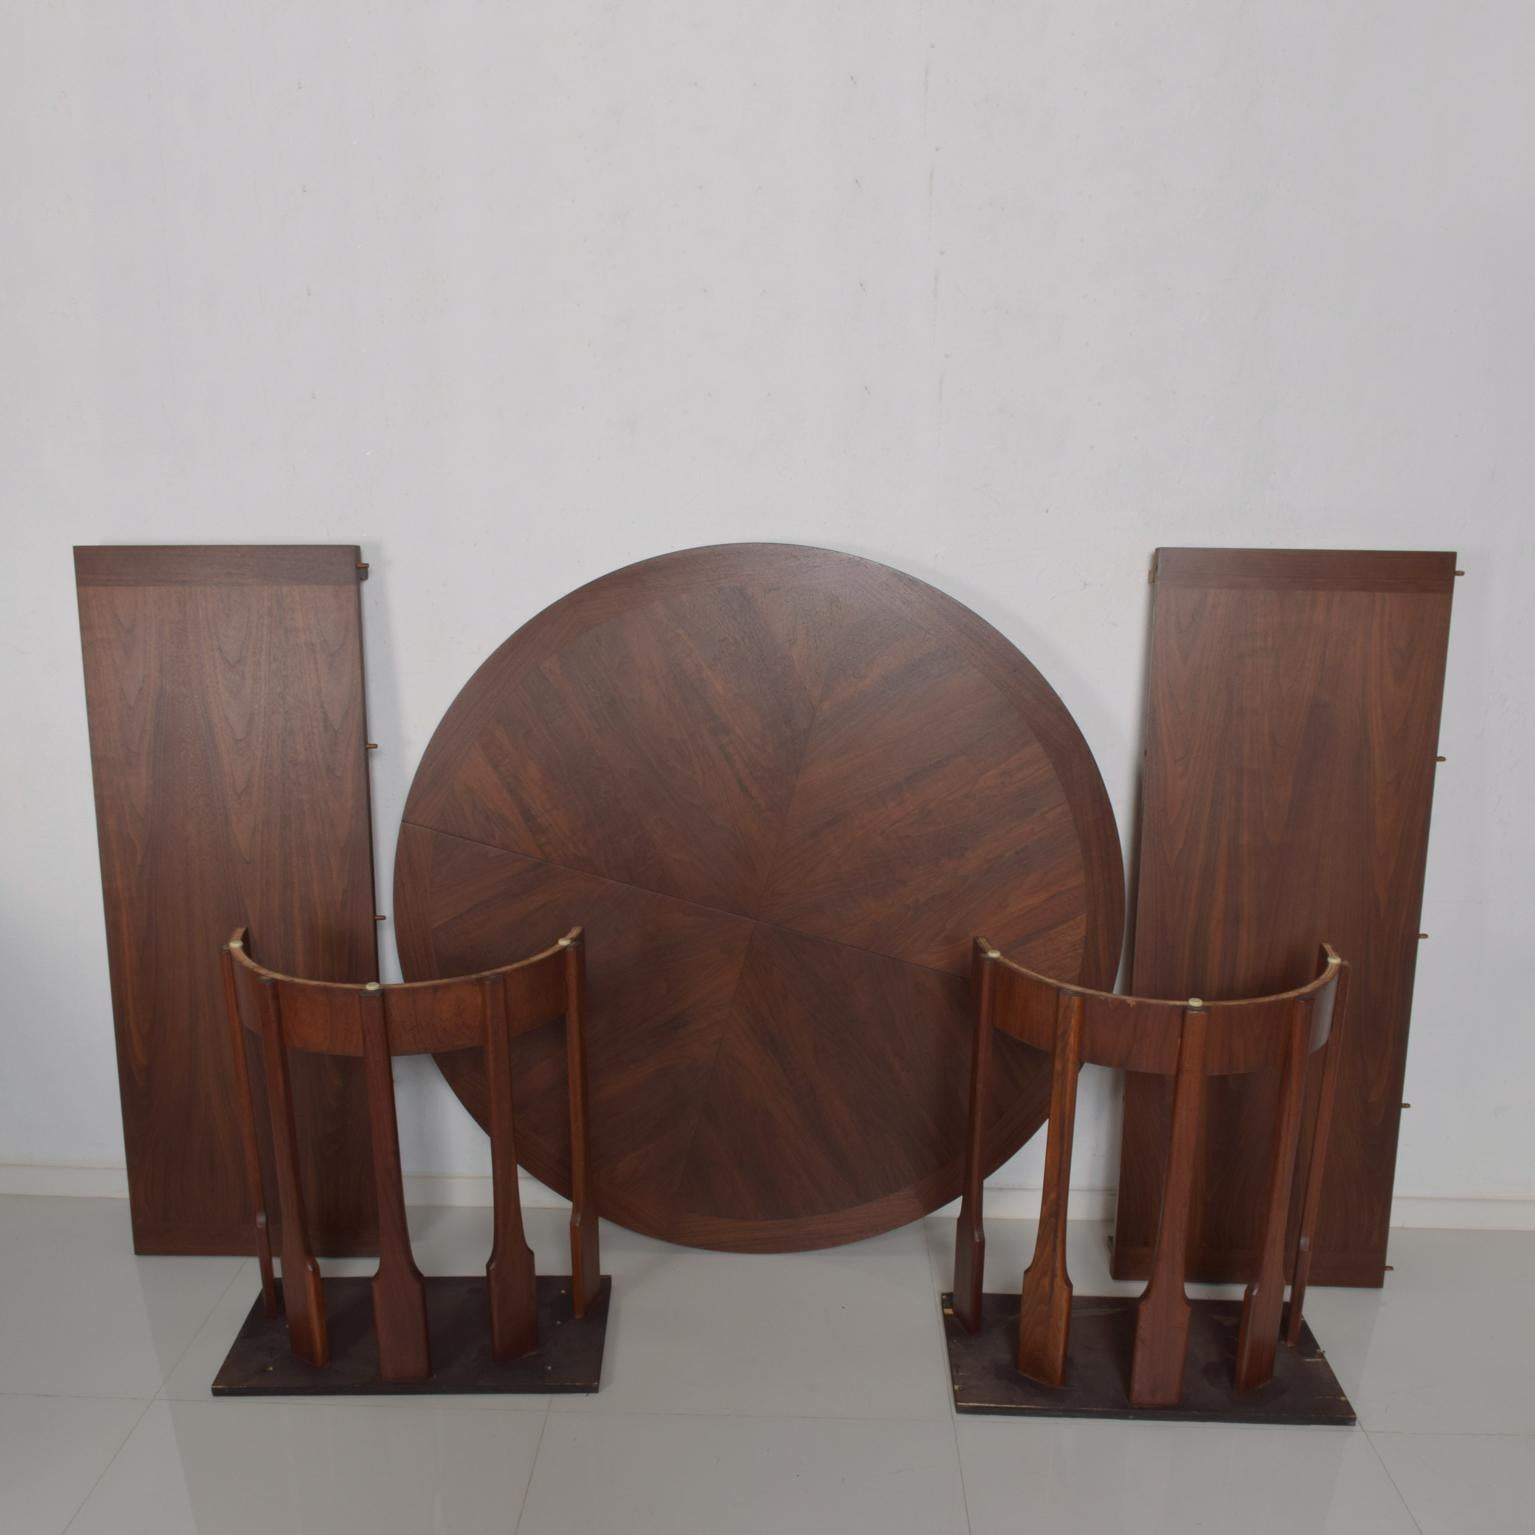 For your consideration: Beautiful MCM round walnut sculptural dining table by John Keal for Brown Saltman.

Dimensions: 84